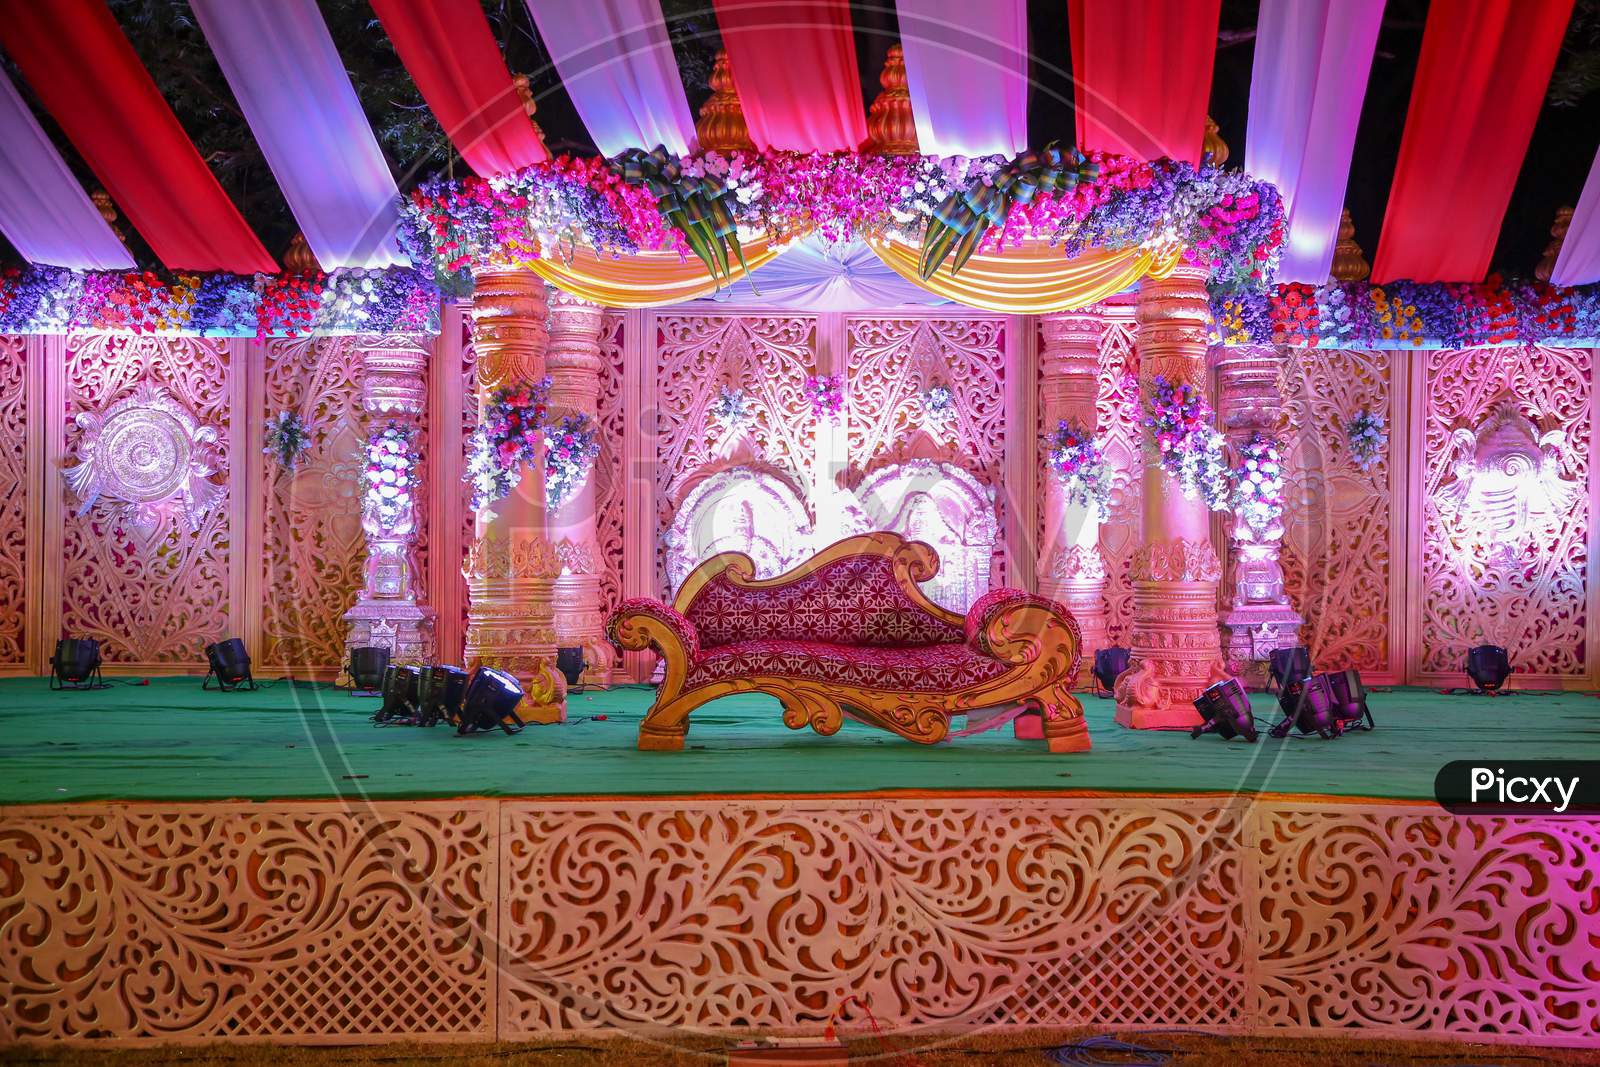 Decorated Stages With Lights And Flowers At Indian Weddings